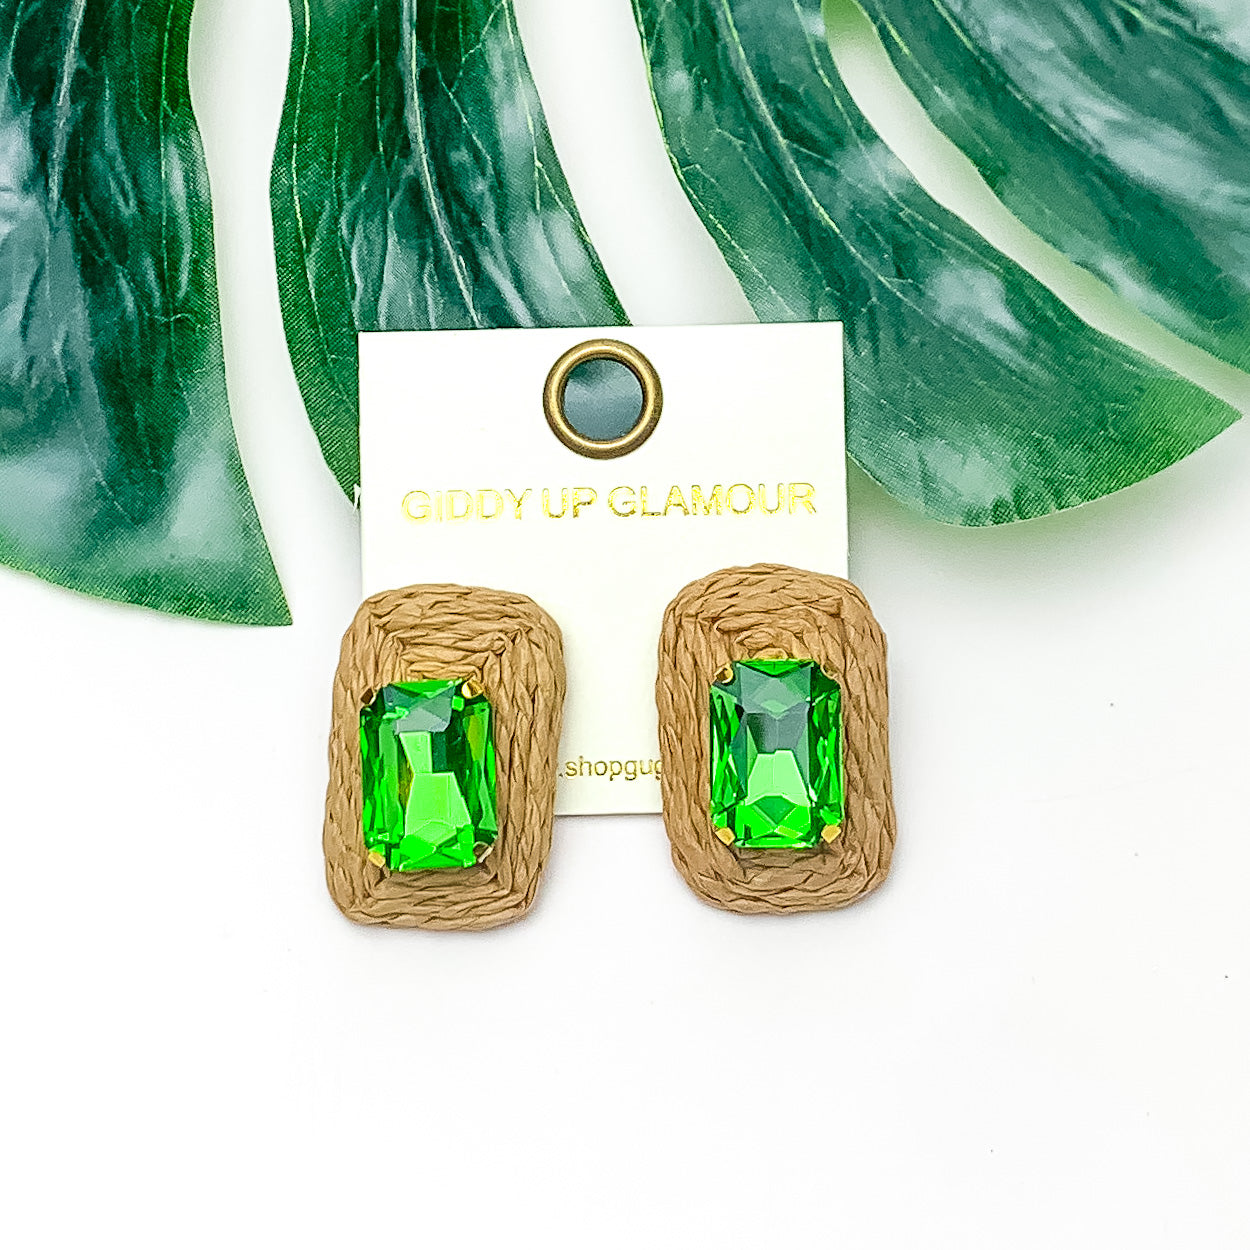 Truly Tropical Raffia Rectangle Earrings in Brown With Green Crystal. Pictured on a white background with the earrings laying on a large leaf.